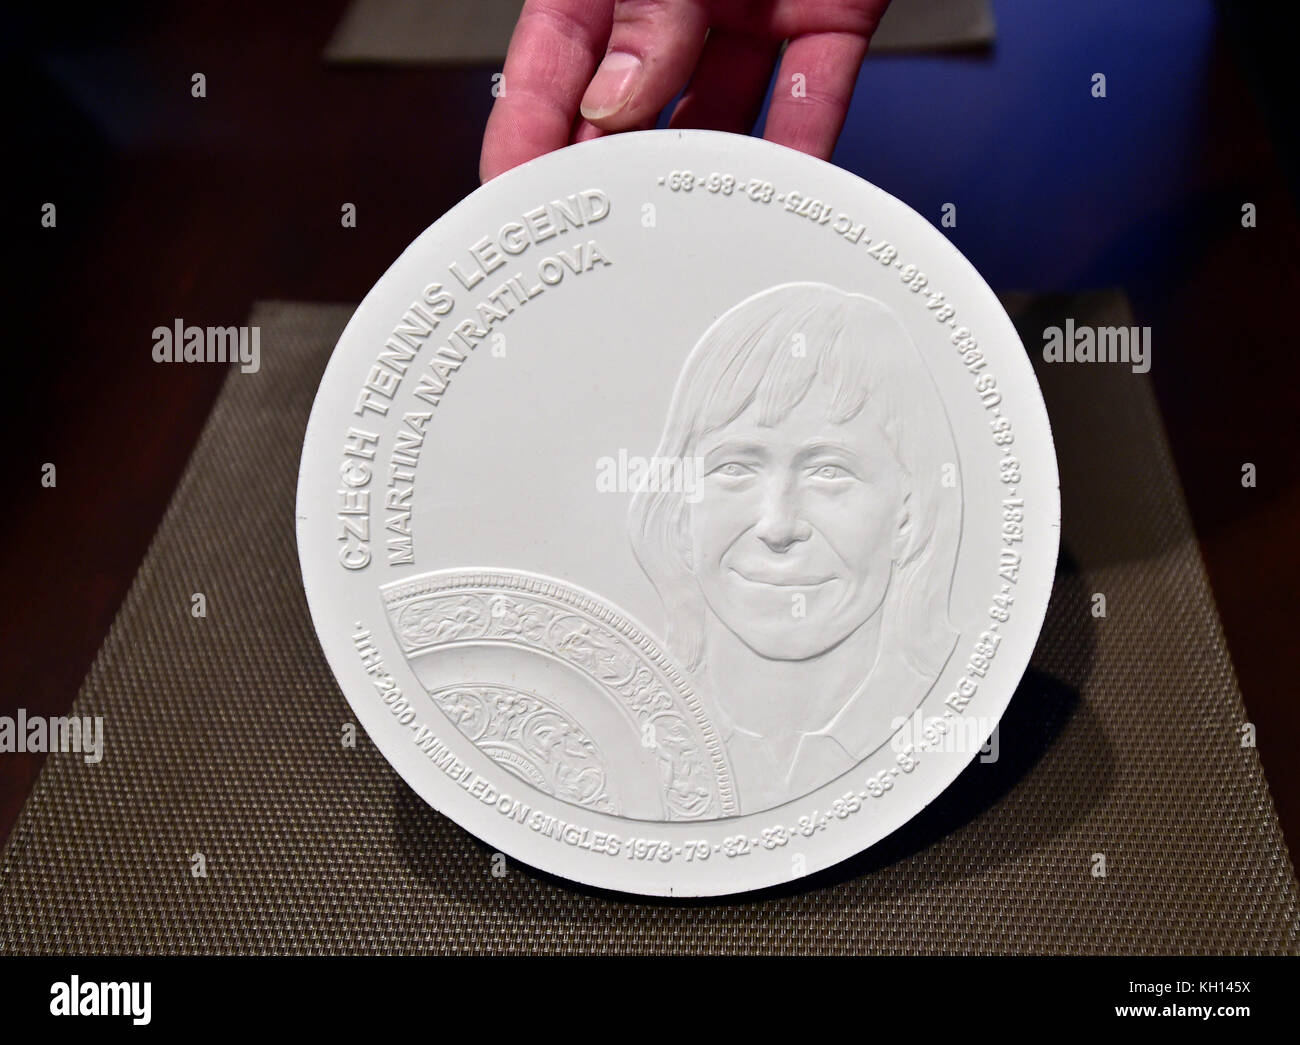 Czech Wimbledon winners Martina Navratilova and Jan Kodes are the first tennis champions to appear on commemorative coins whose gypsum models (on the photo Martina Navratilova) the Ceska mincovna (Czech Mint) unveiled today, on Monday, November 13, 2017. The mint itself will take place in Jablonec nad Nisou, north Bohemia, in early 2018'. One can perhaps dream of being on a postage stamp, but being on a coin is truly special,' Navratilova said. Navratilova, a U.S. citizen, is a nine-time Wimbledon winner (in 1978-1990). She defected from the Communist Czechoslovakia to the USA in 1975. Kodes w Stock Photo